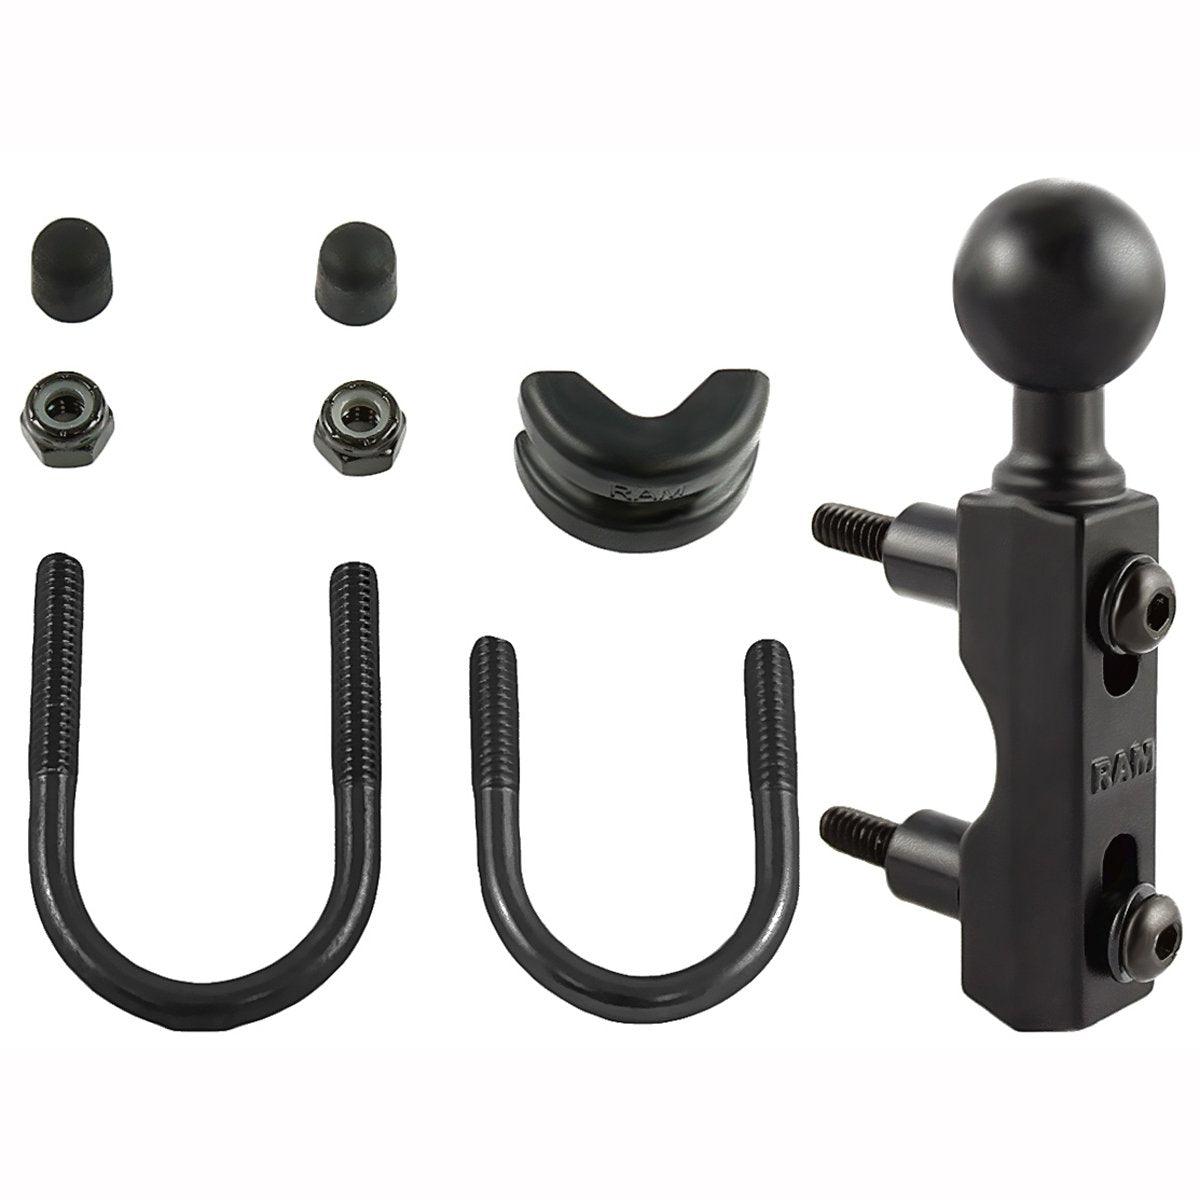 Ram Motorcycle Handlebar Mount with 1 Inch Ball - Black - Browse our range of Accessories: Phone Holders - getgearedshop 